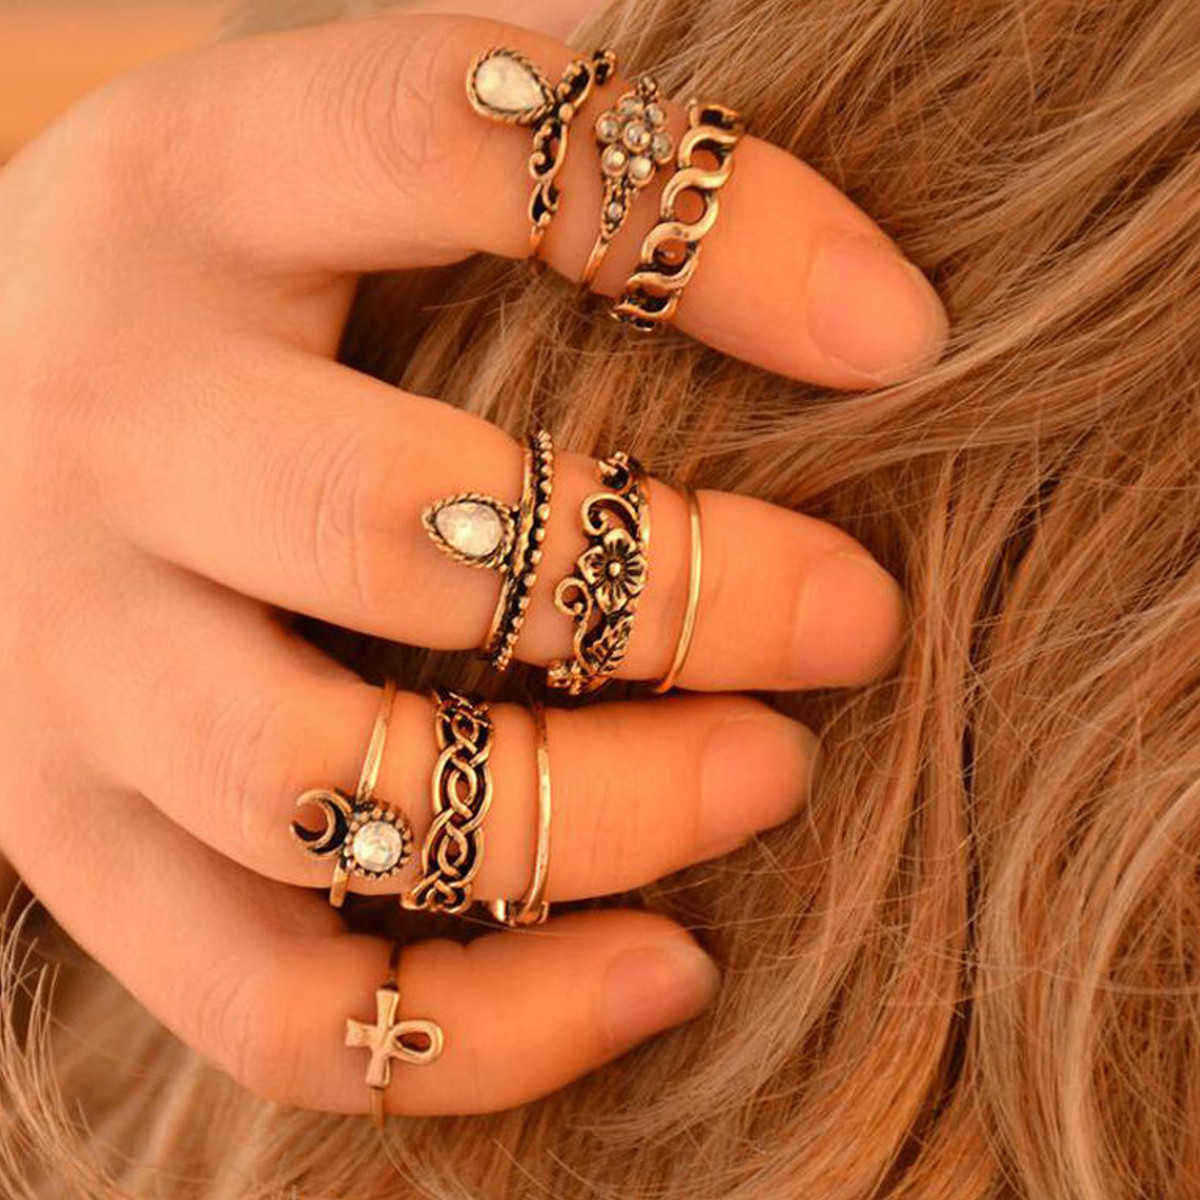 10pcs-Vintage-Knuckle-Rings-Tribal-Ethnic-Hippie-Joint-Punk-Ring-Set-for-Women-1082097